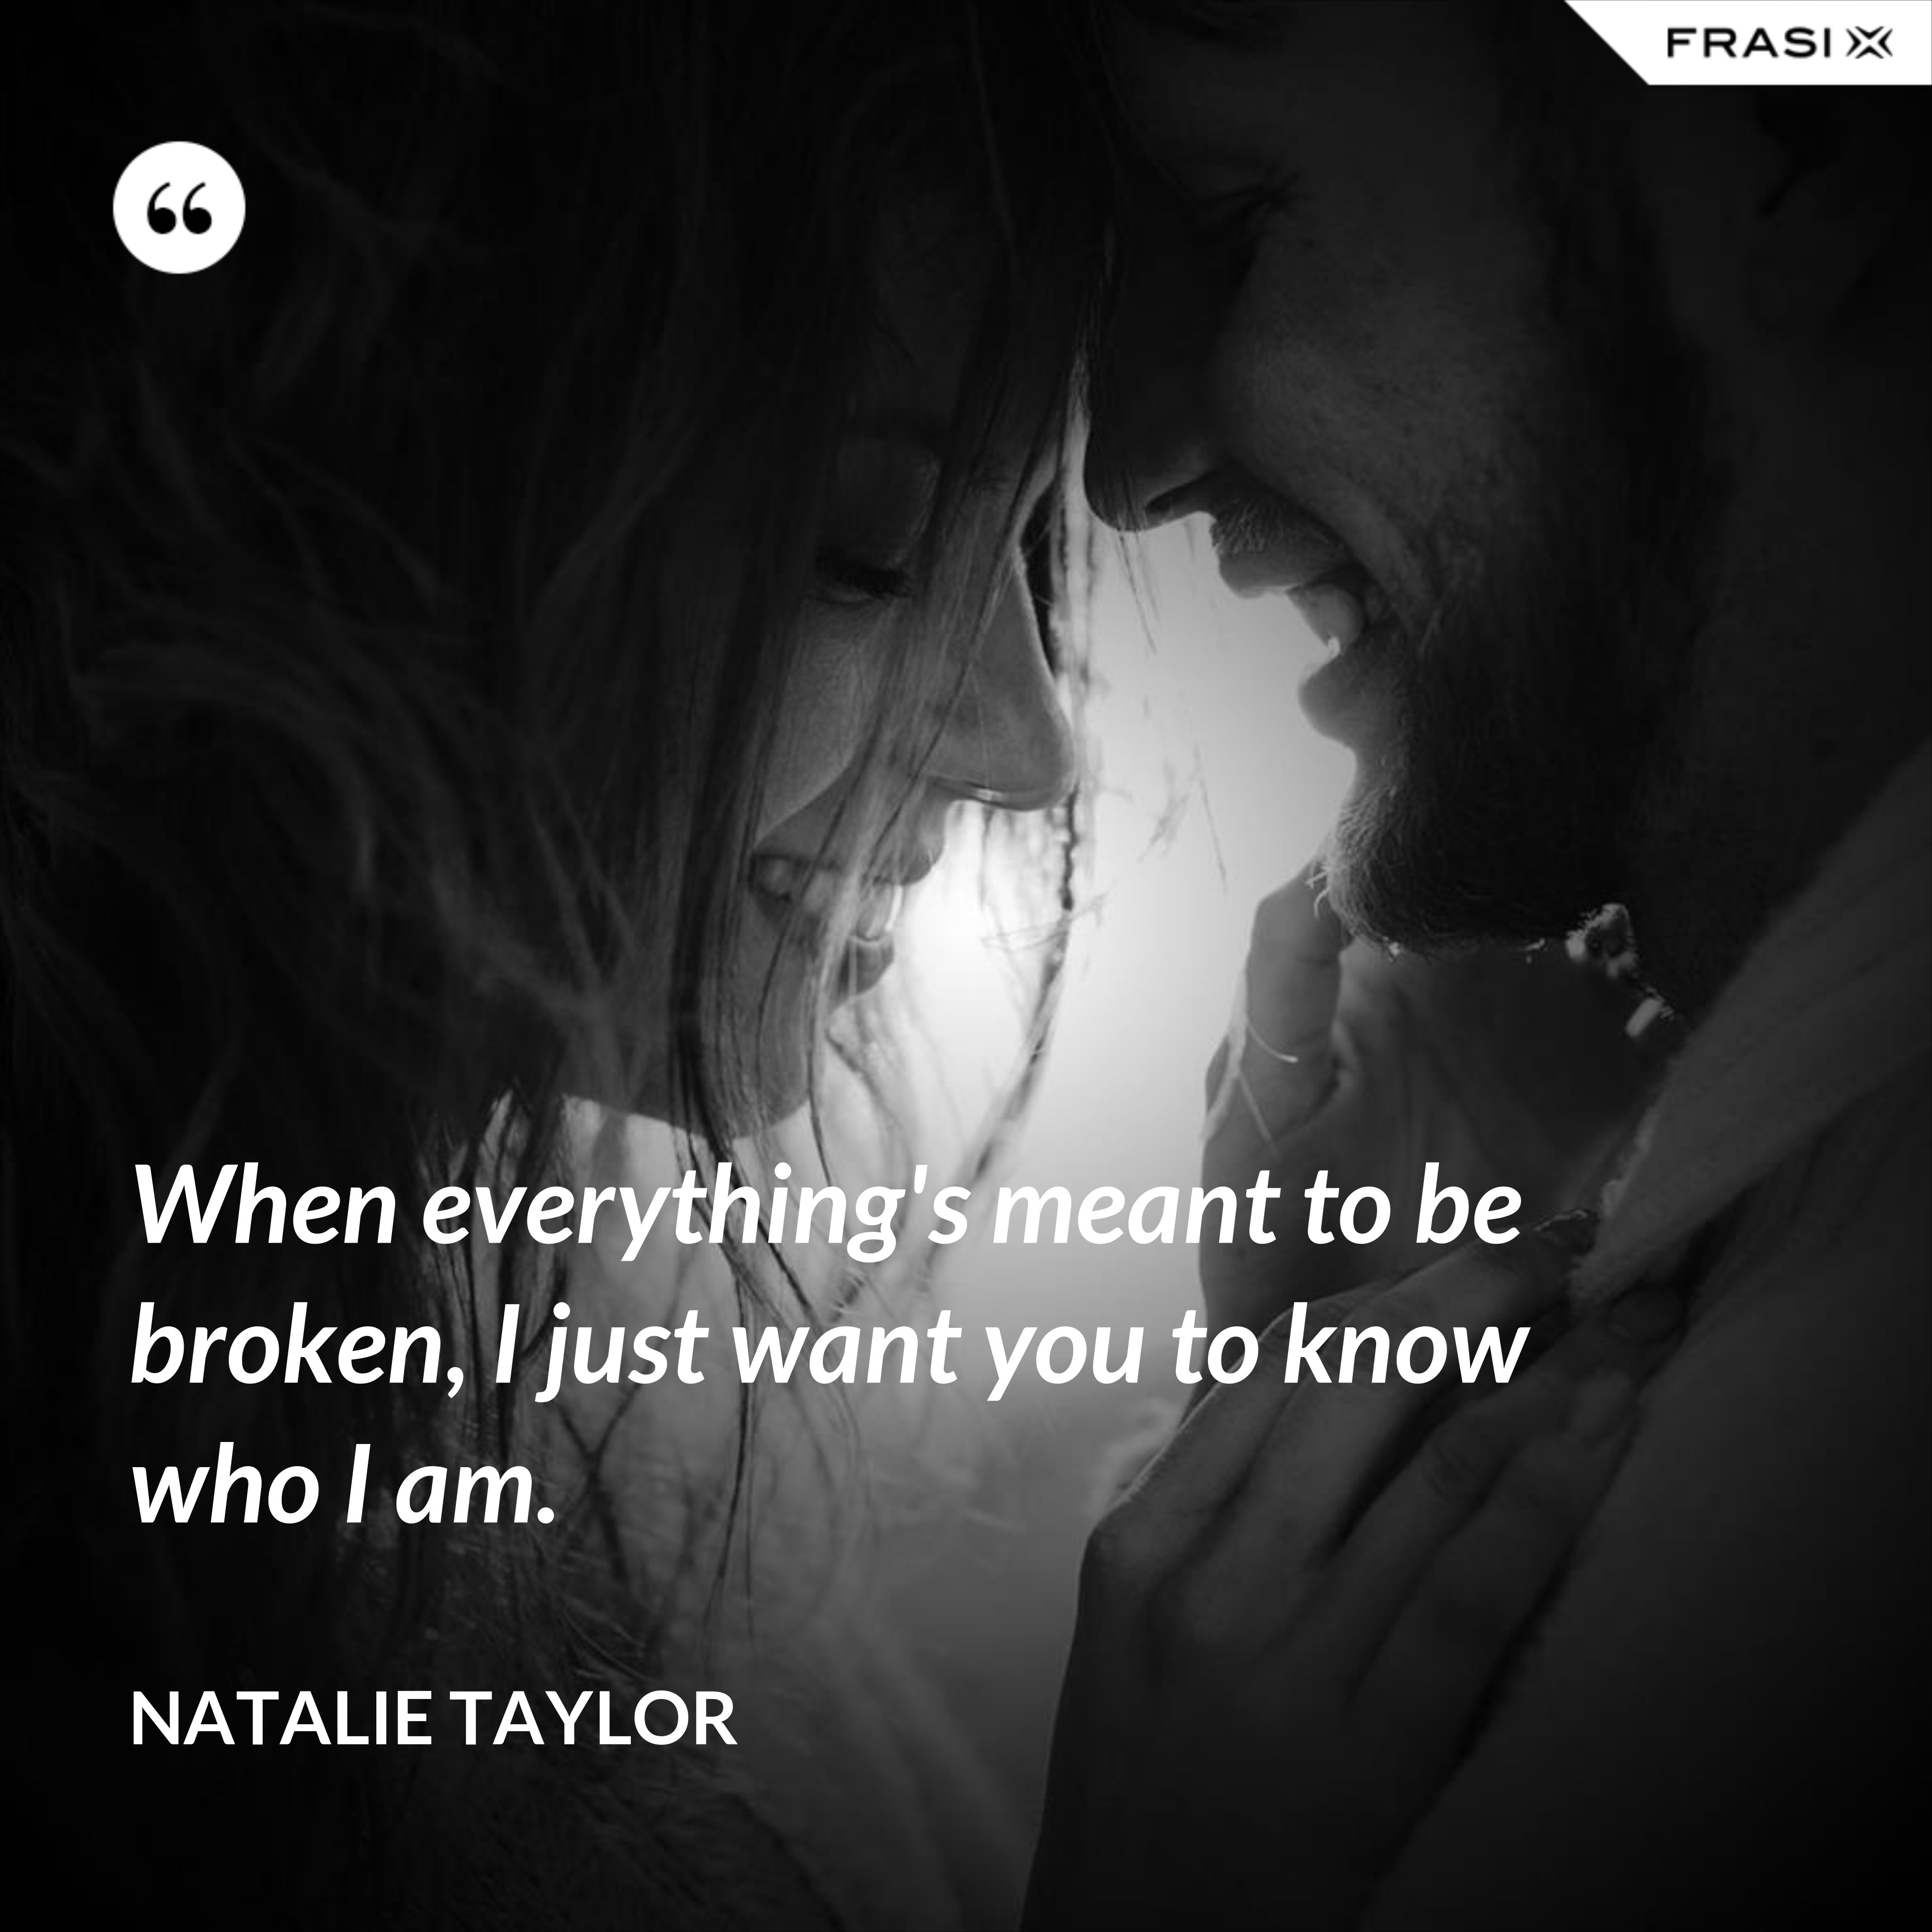 When everything's meant to be broken, I just want you to know who I am. - Natalie Taylor